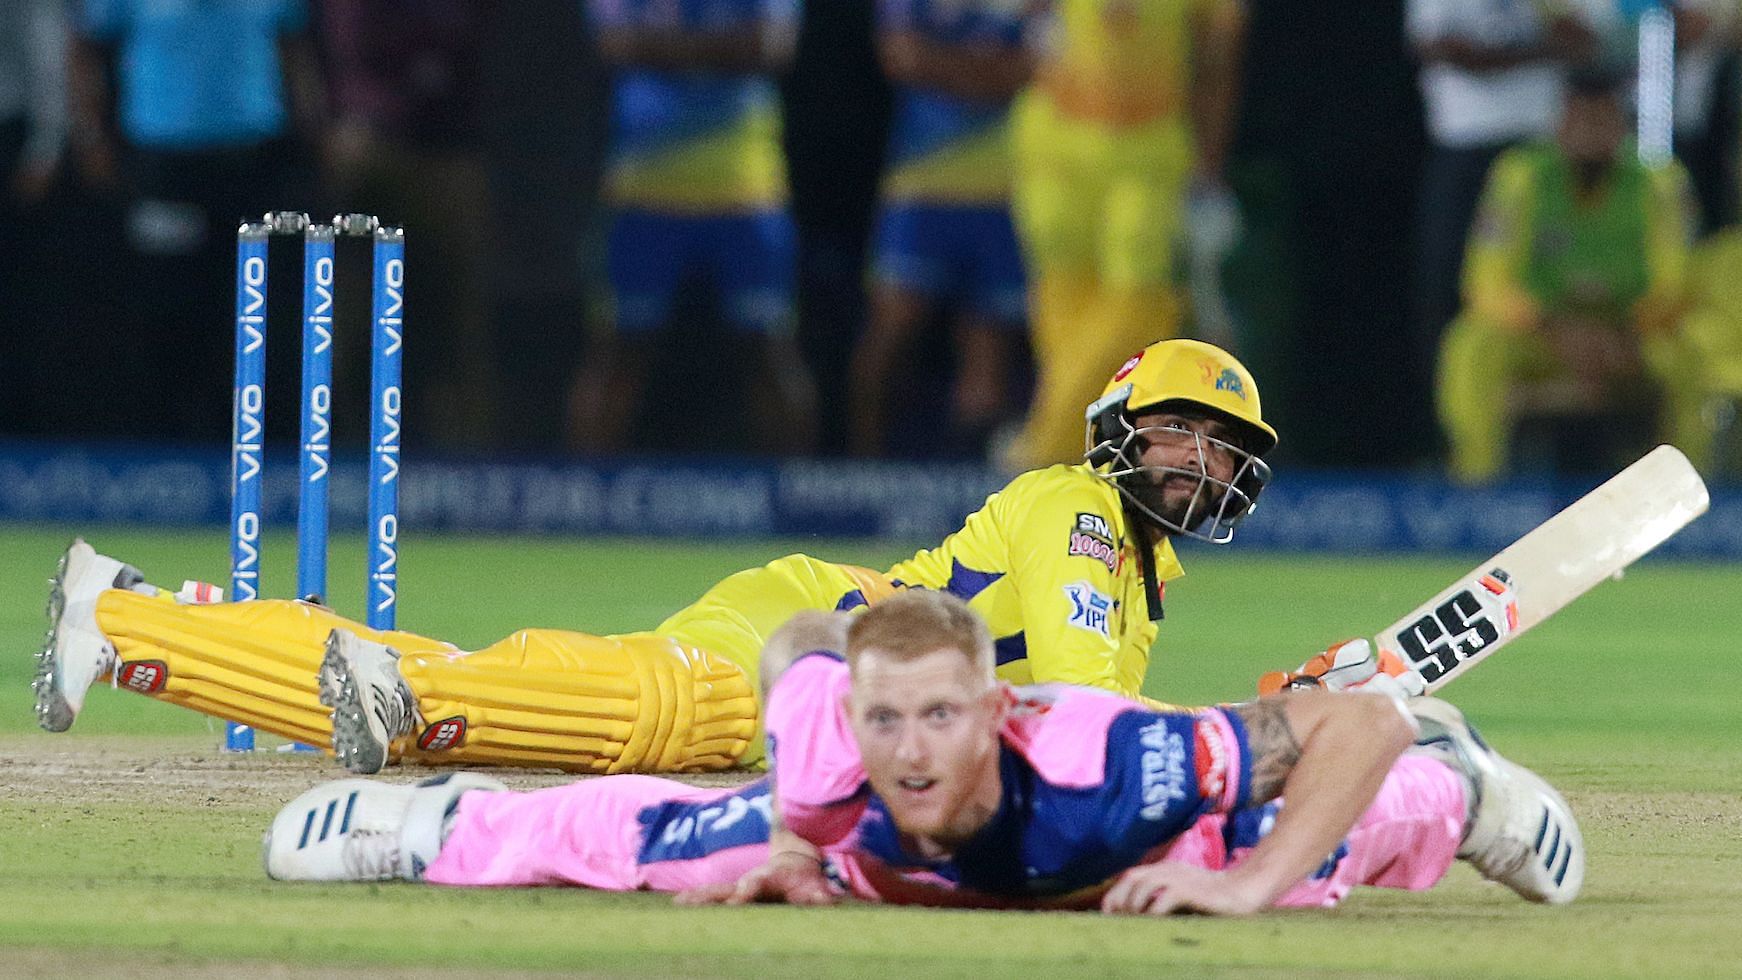 Stokes fell down after delivering the ball, while Jadeja fell after hitting it for a six.